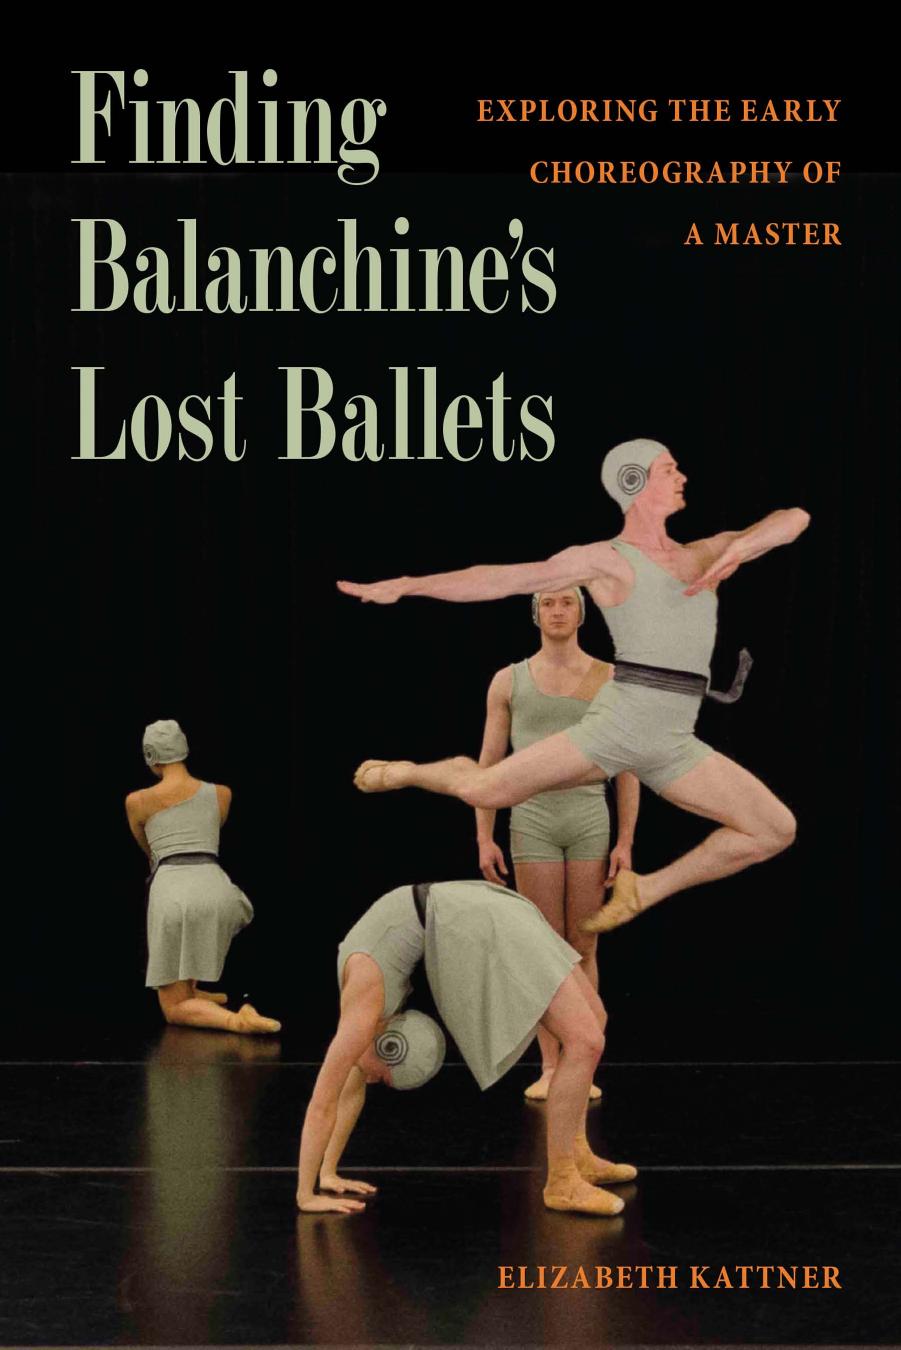 Finding Balanchine's Lost Ballets : Exploring the Early Choreography of a Master by Elizabeth Kattner